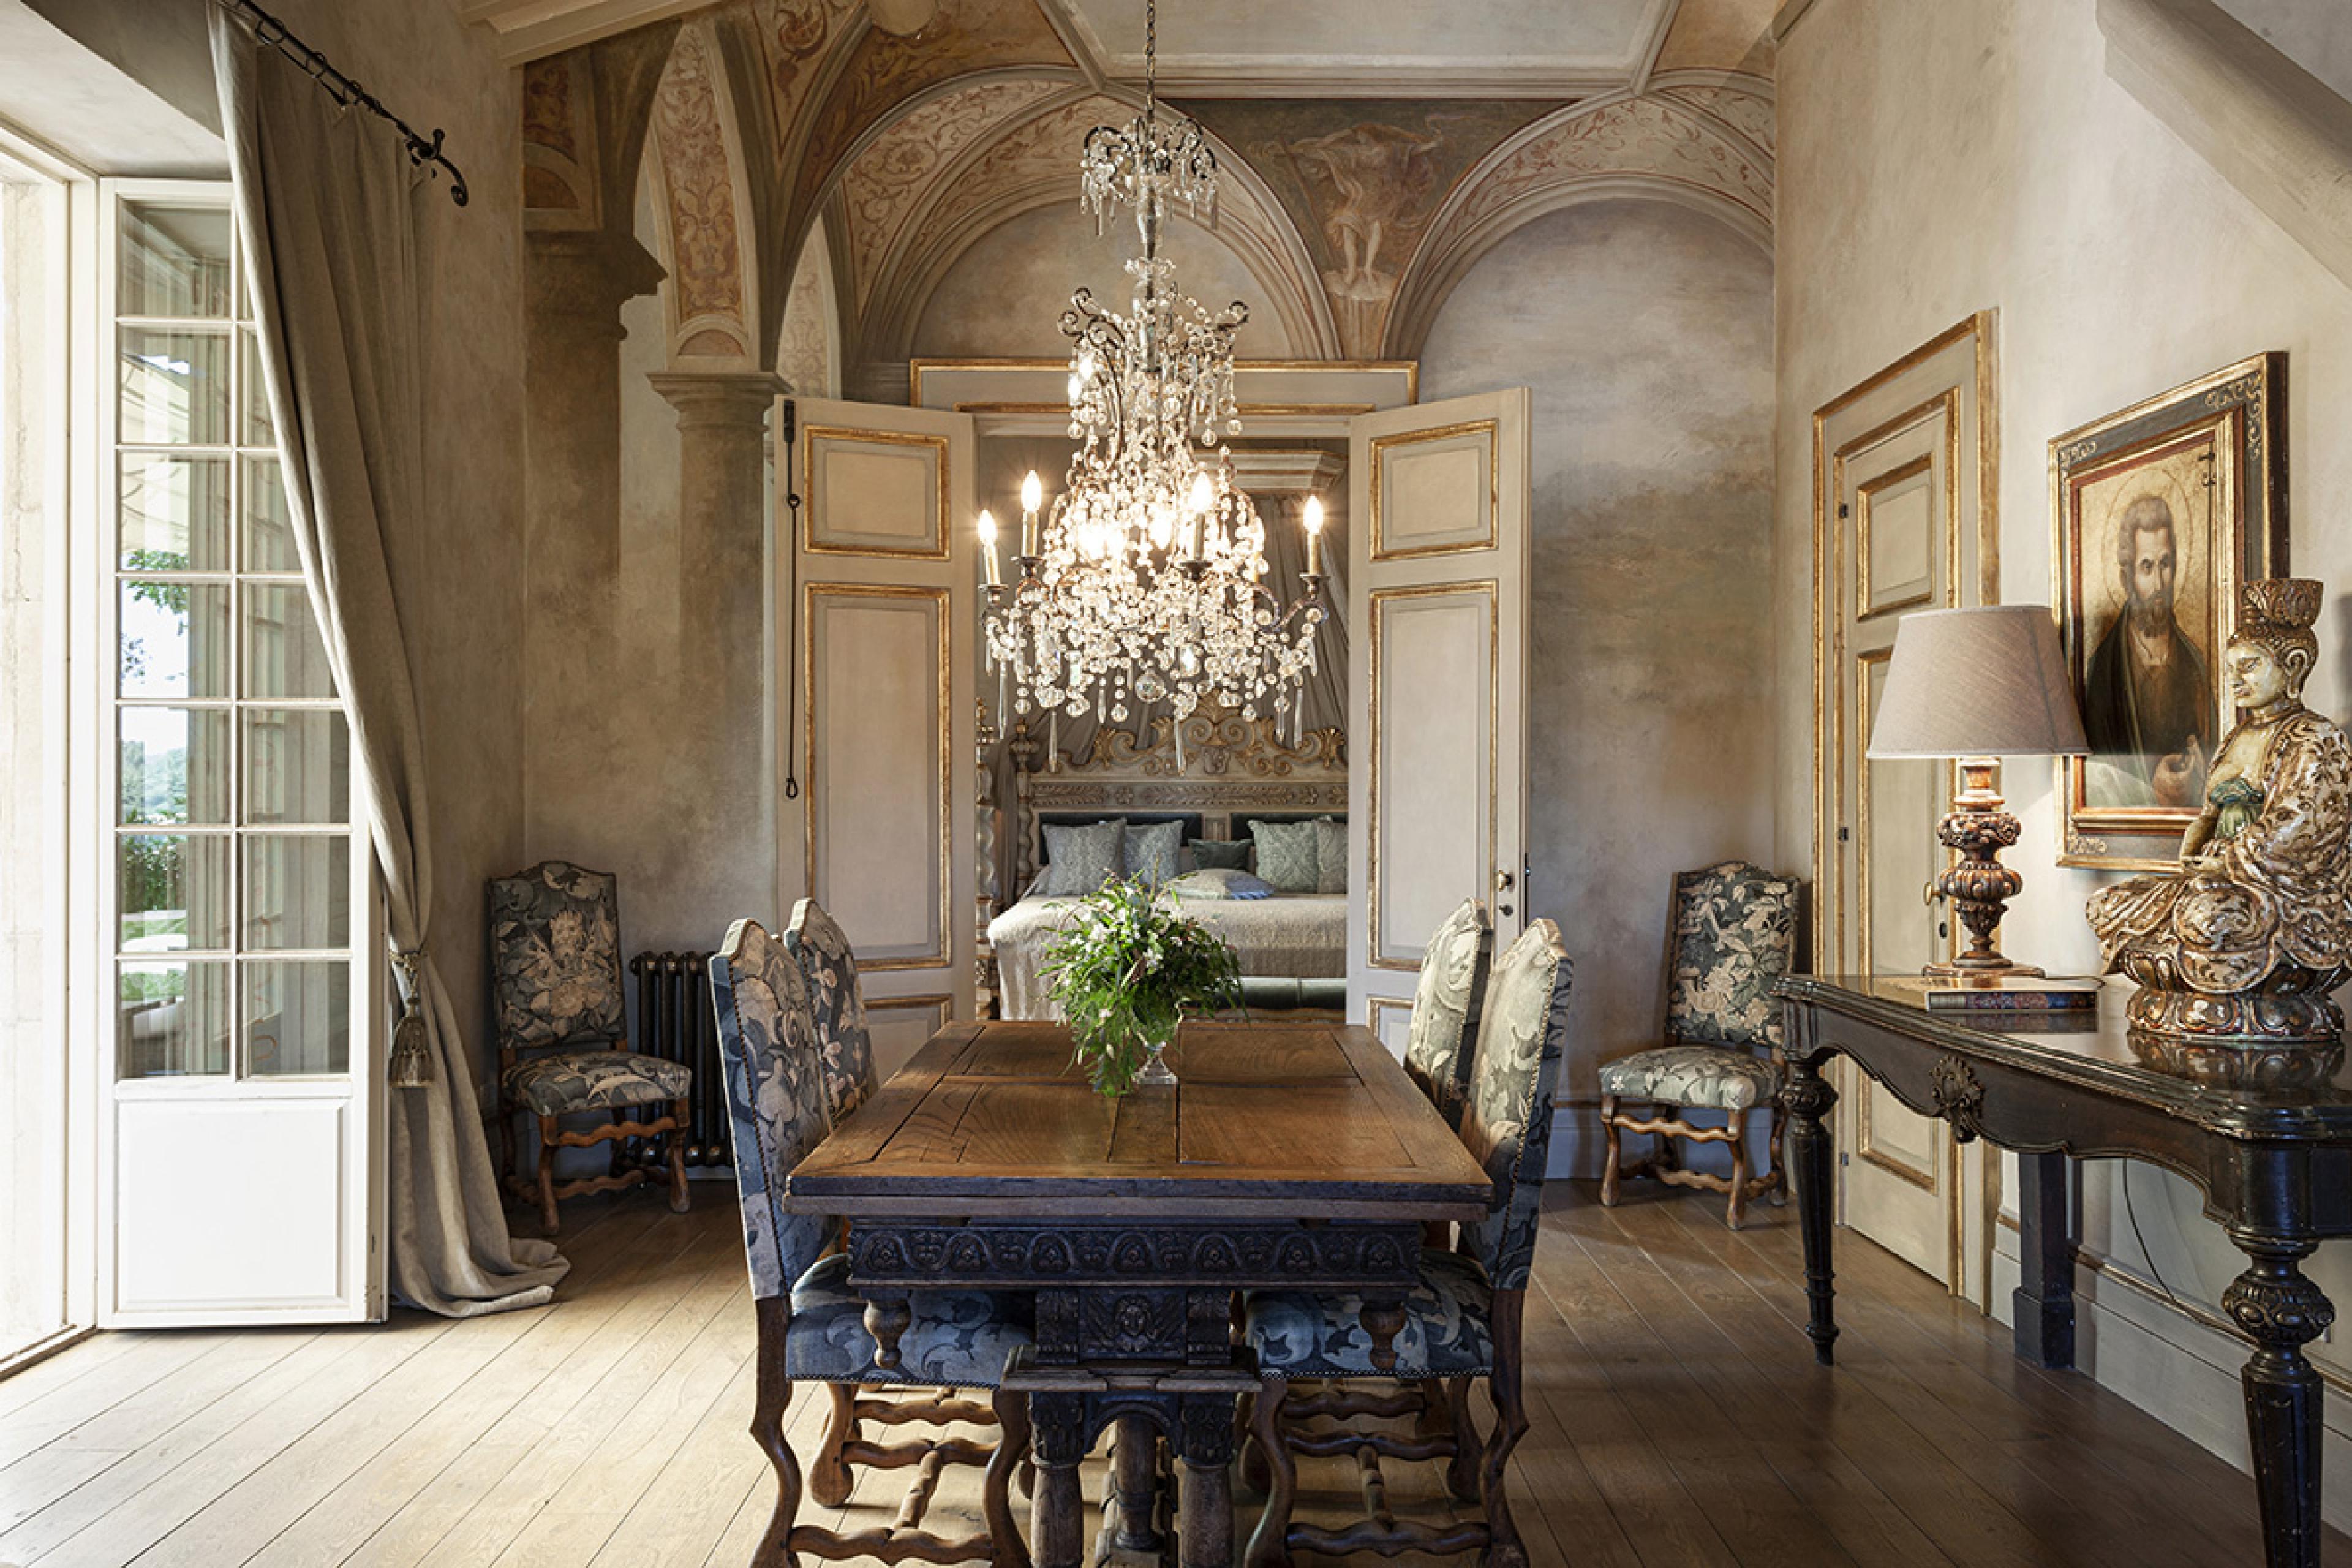 romantic rustic dining room with stone walls and a crystal chandelier